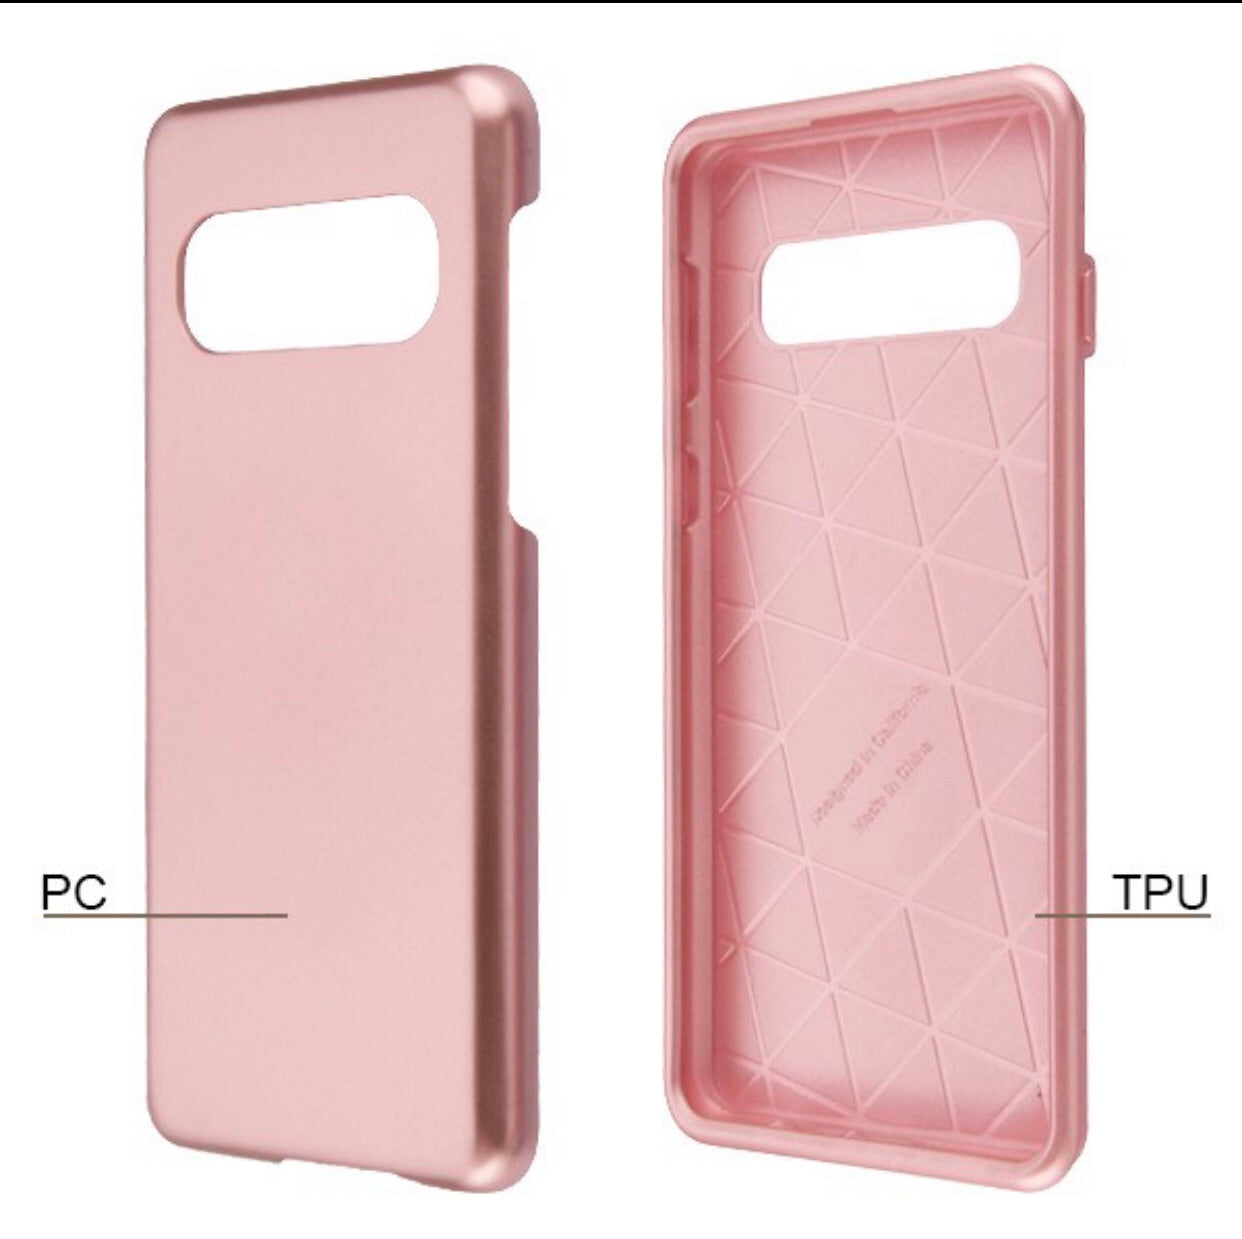 Rose Gold/Metallic Rose Gold Fuse Hybrid Protector Cover